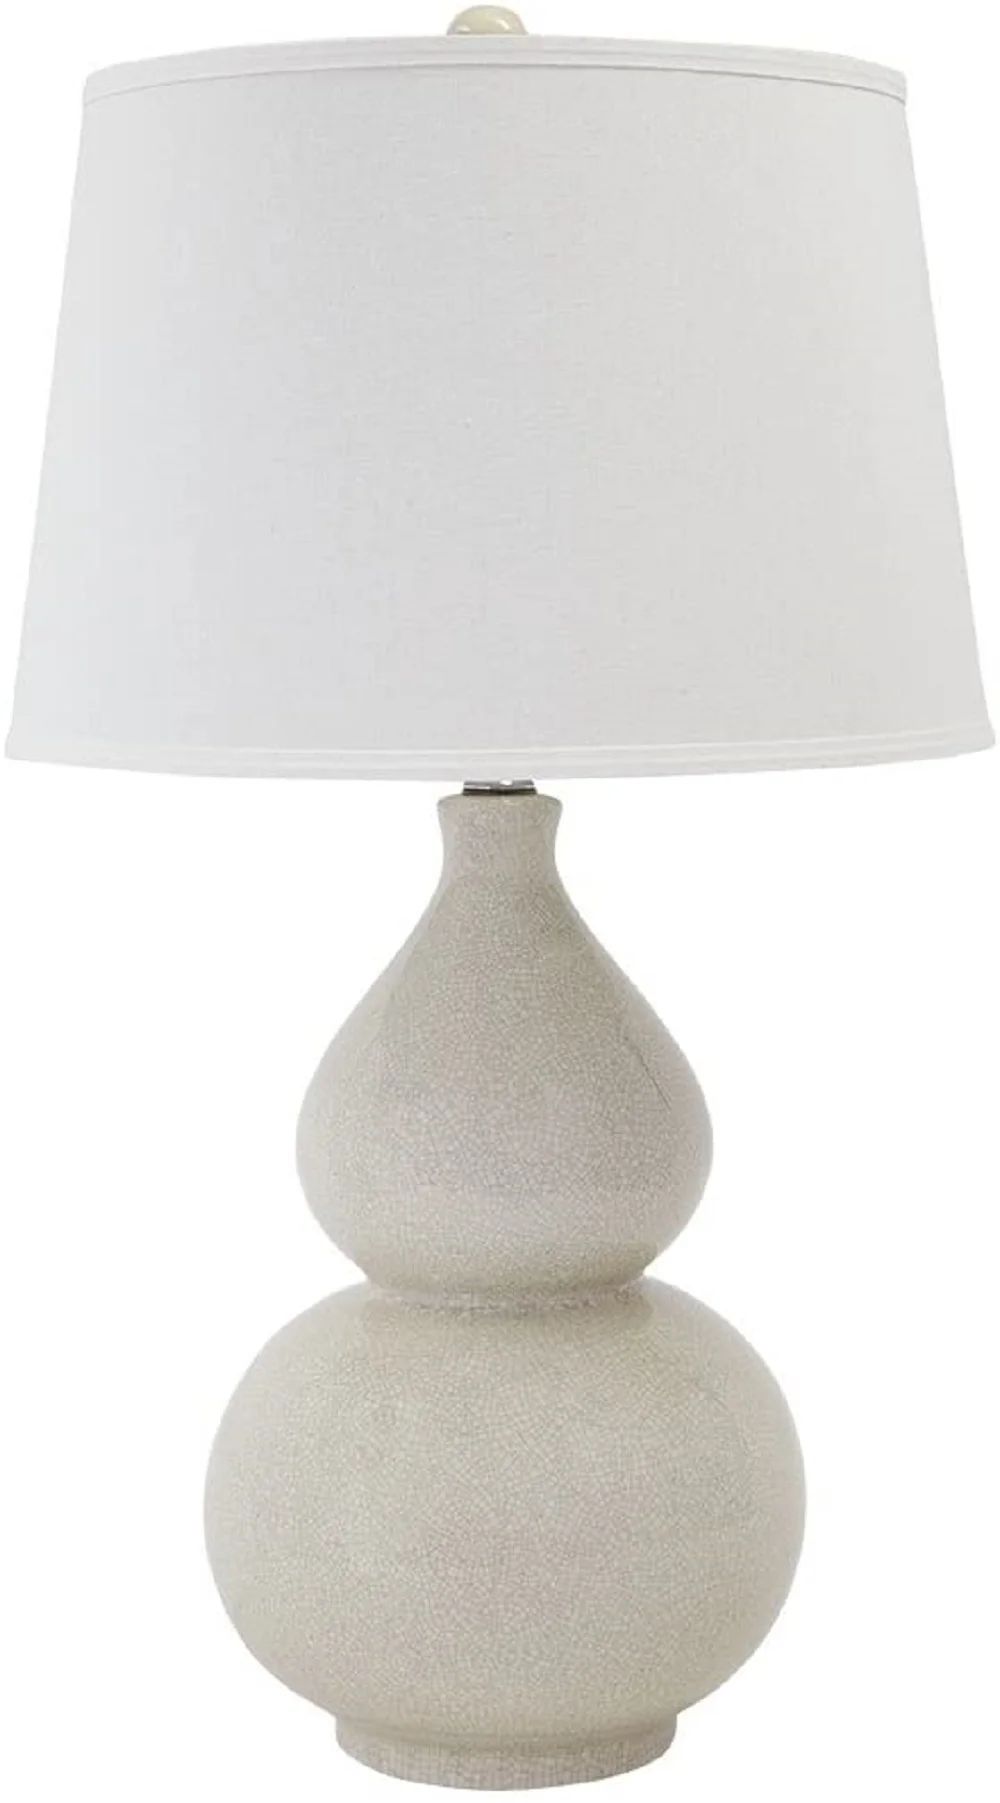 Ceramic Table Lamp With Double Gourd Base | Wayfair North America